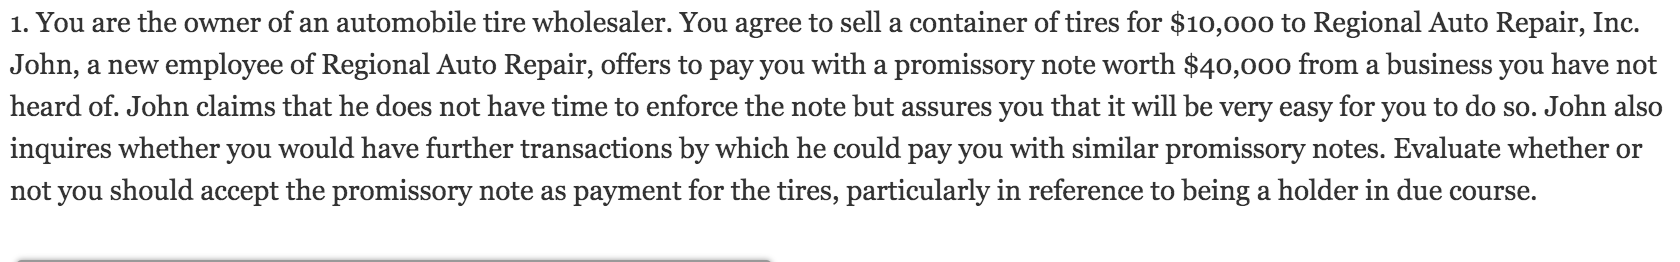 1. You are the owner of an automobile tire wholesaler. You agree to sell a container of tires for $10,000 to Regional Auto Repair, Inc.
John, a new employee of Regional Auto Repair, offers to pay you with a promissory note worth $40,000 from a business you have not
heard of. John claims that he does not have time to enforce the note but assures you that it will be very easy for you to do so. John also
inquires whether you would have further transactions by which he could pay you with similar promissory notes. Evaluate whether or
not you should accept the promissory note as payment for the tires, particularly in reference to being a holder in due course.
